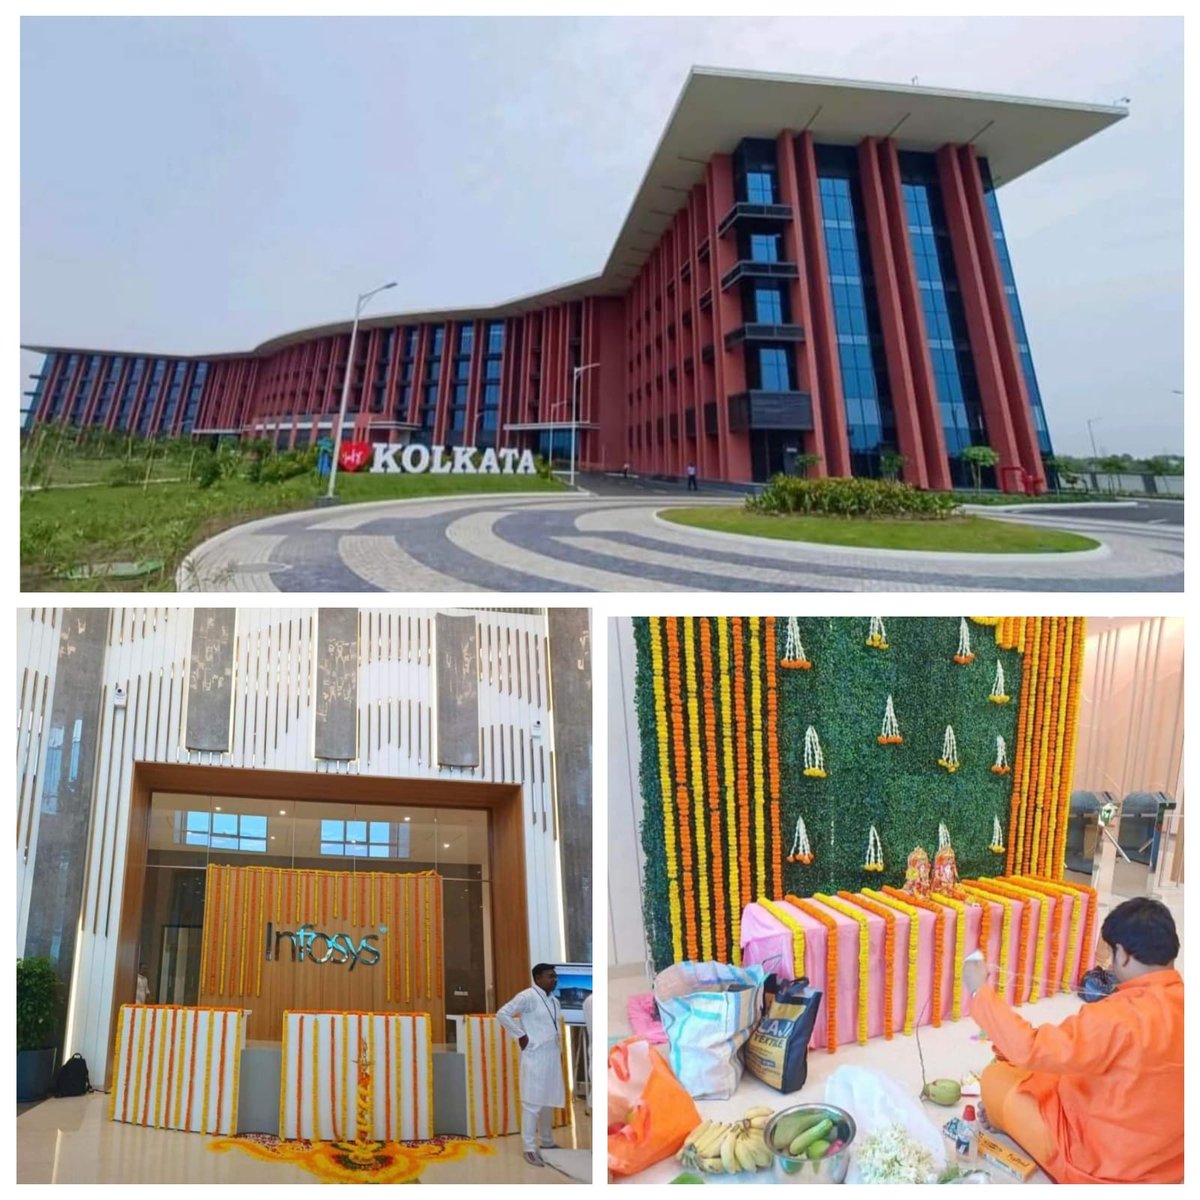 Infosys campus in Rajarhat Newtown was inaugurated today. In the first phase, 3000+ IT workers will be able to work together in this campus. Once the next phase is completed, the 50-acre campus will house 10,000+ workers.